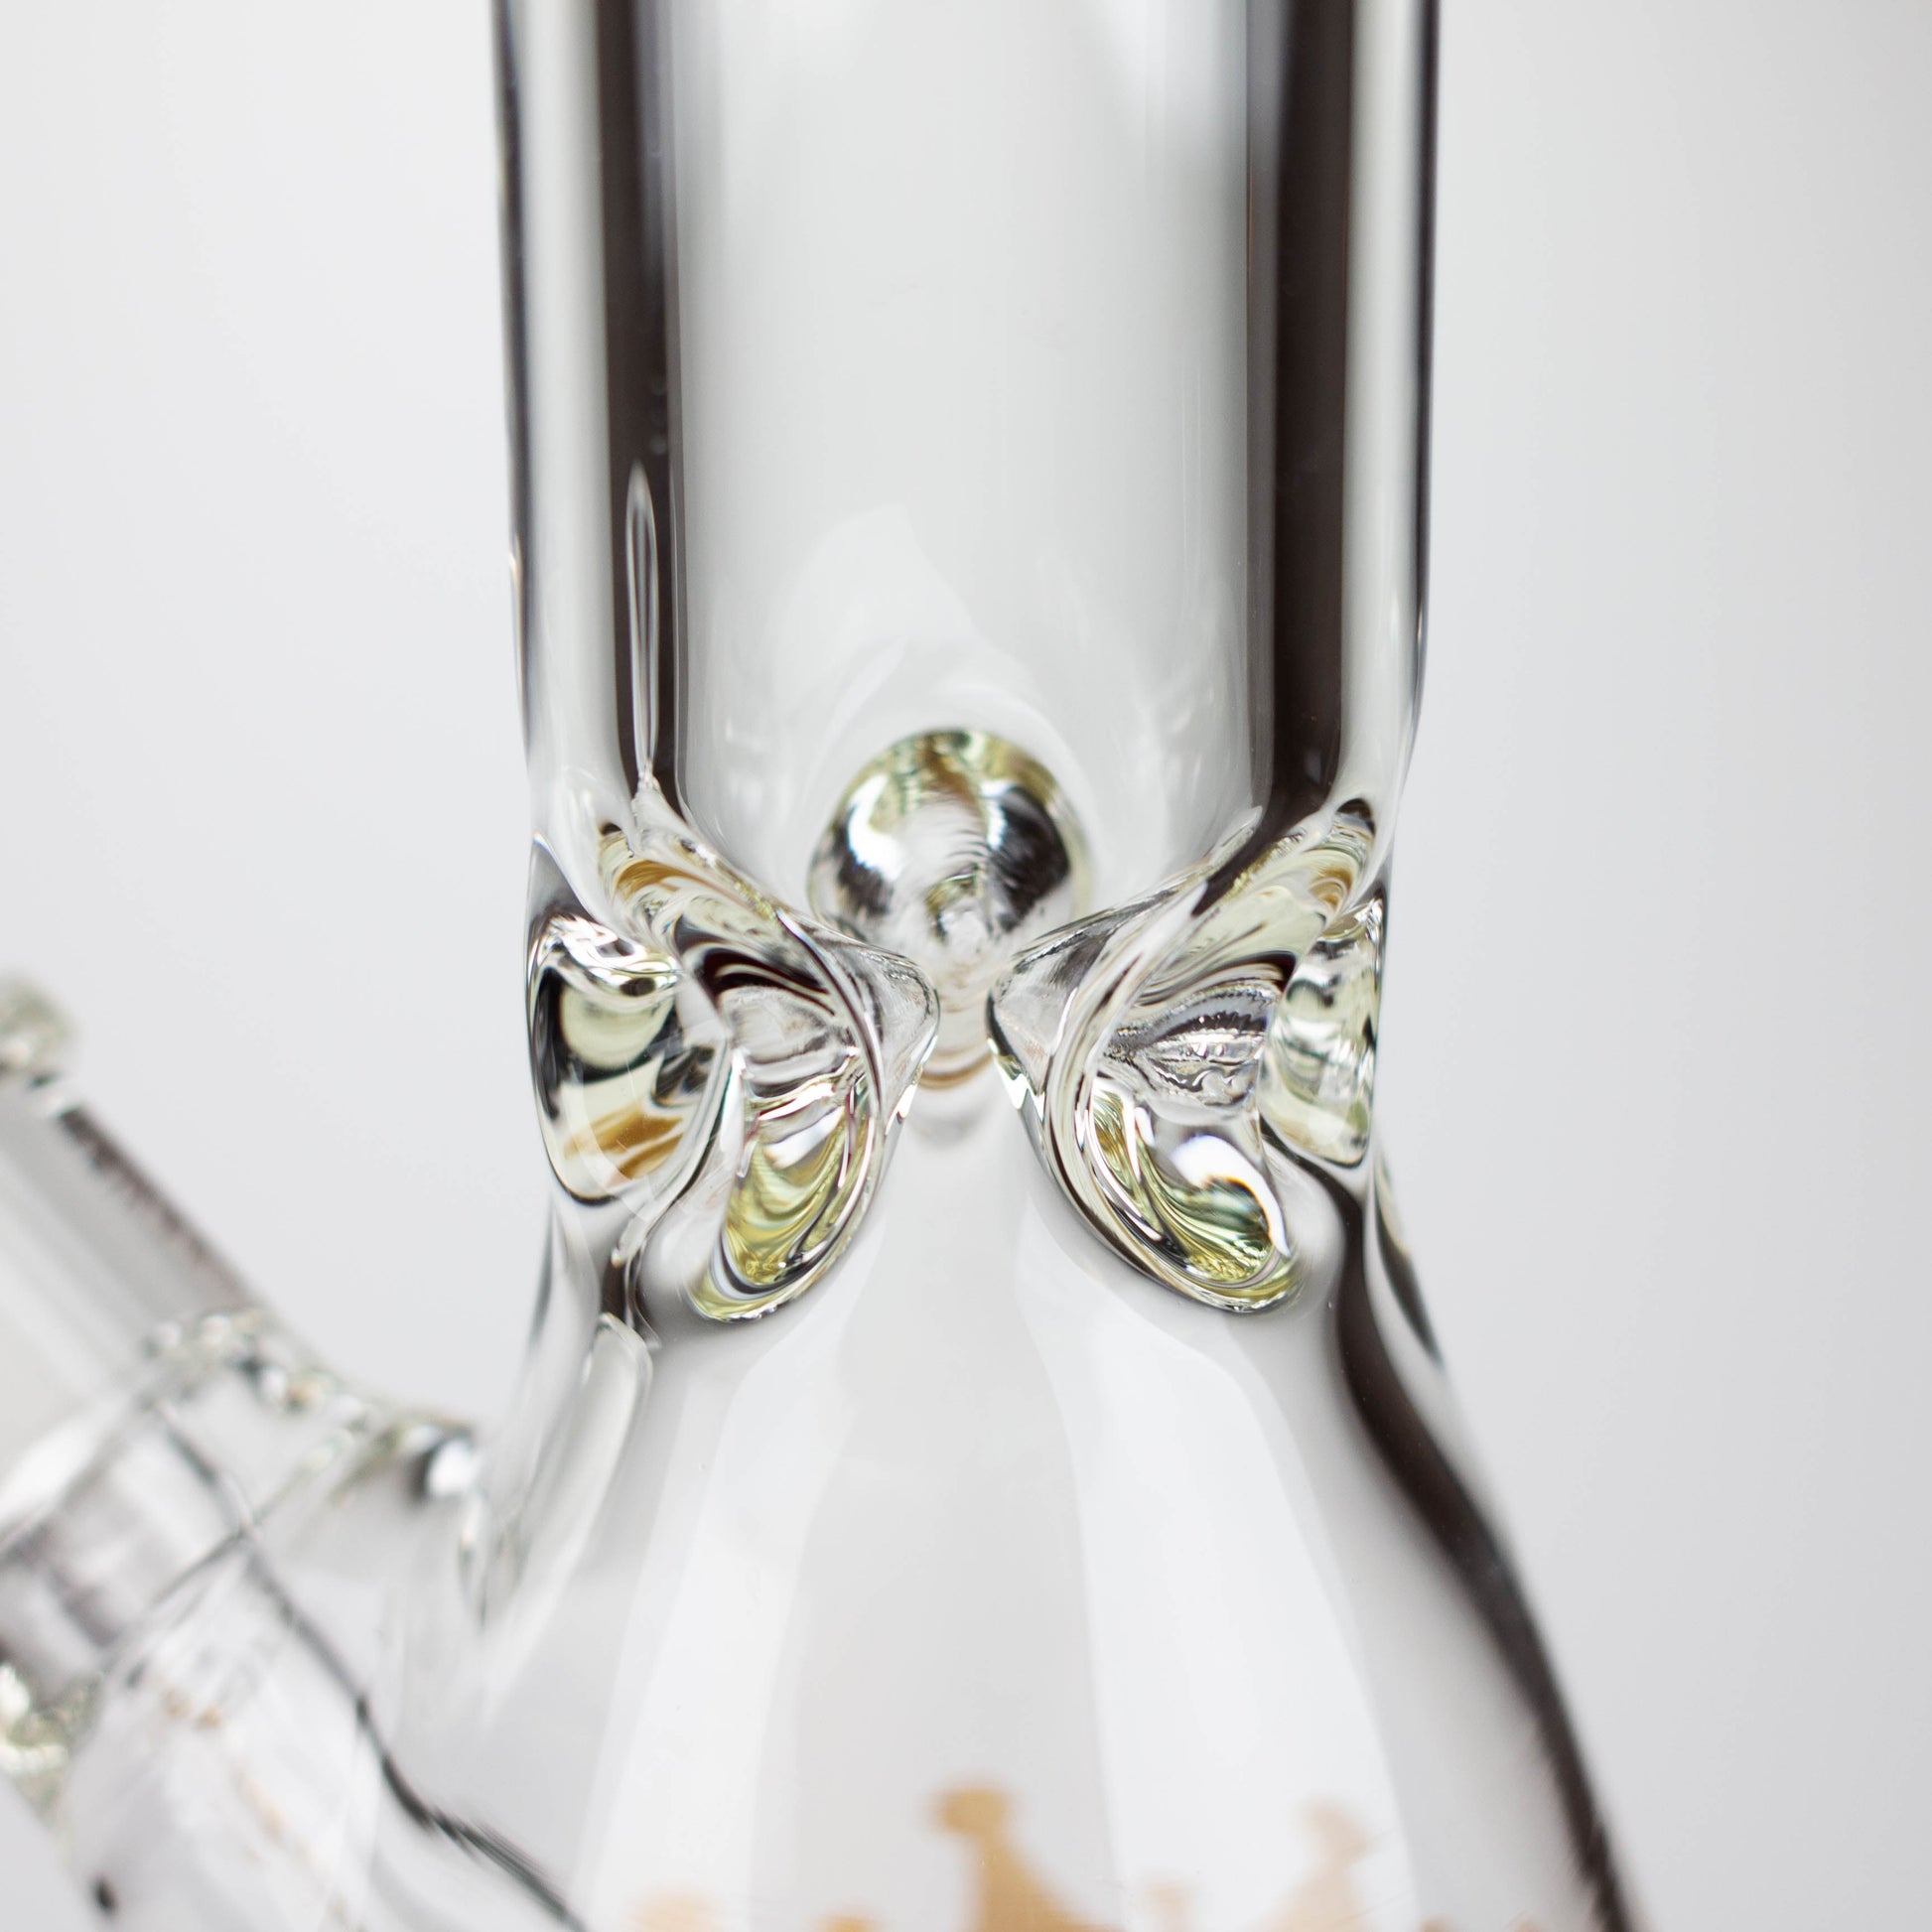 Golden Crown™ | 18 Inch 9mm glass bong with Signature and 24K Gold Emblem_9